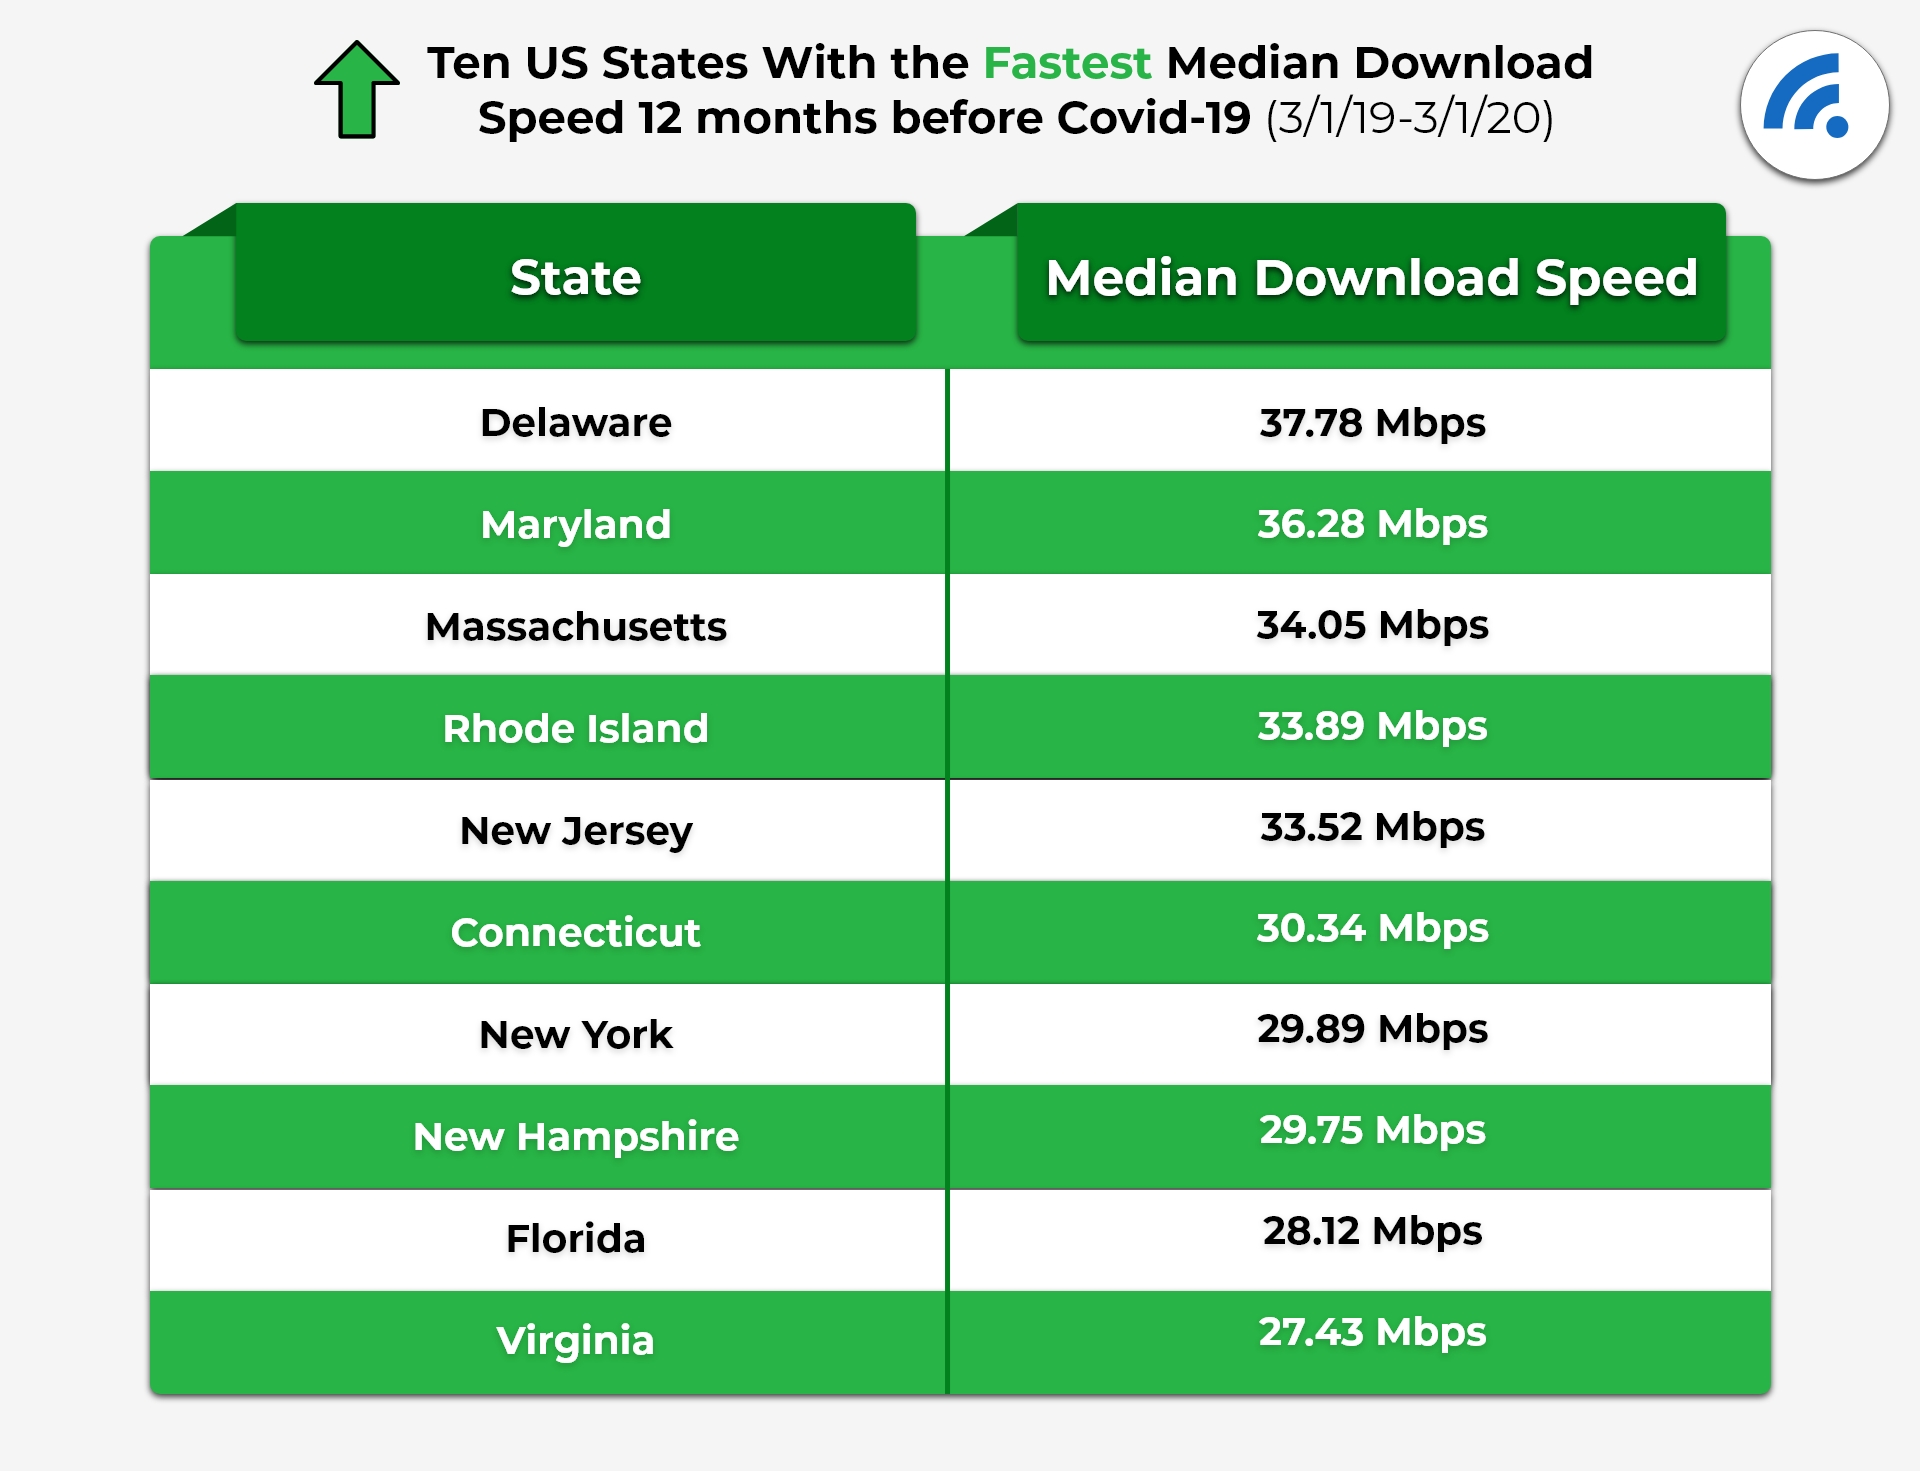 States With The Fatest Median Download Speed Before COVID-19